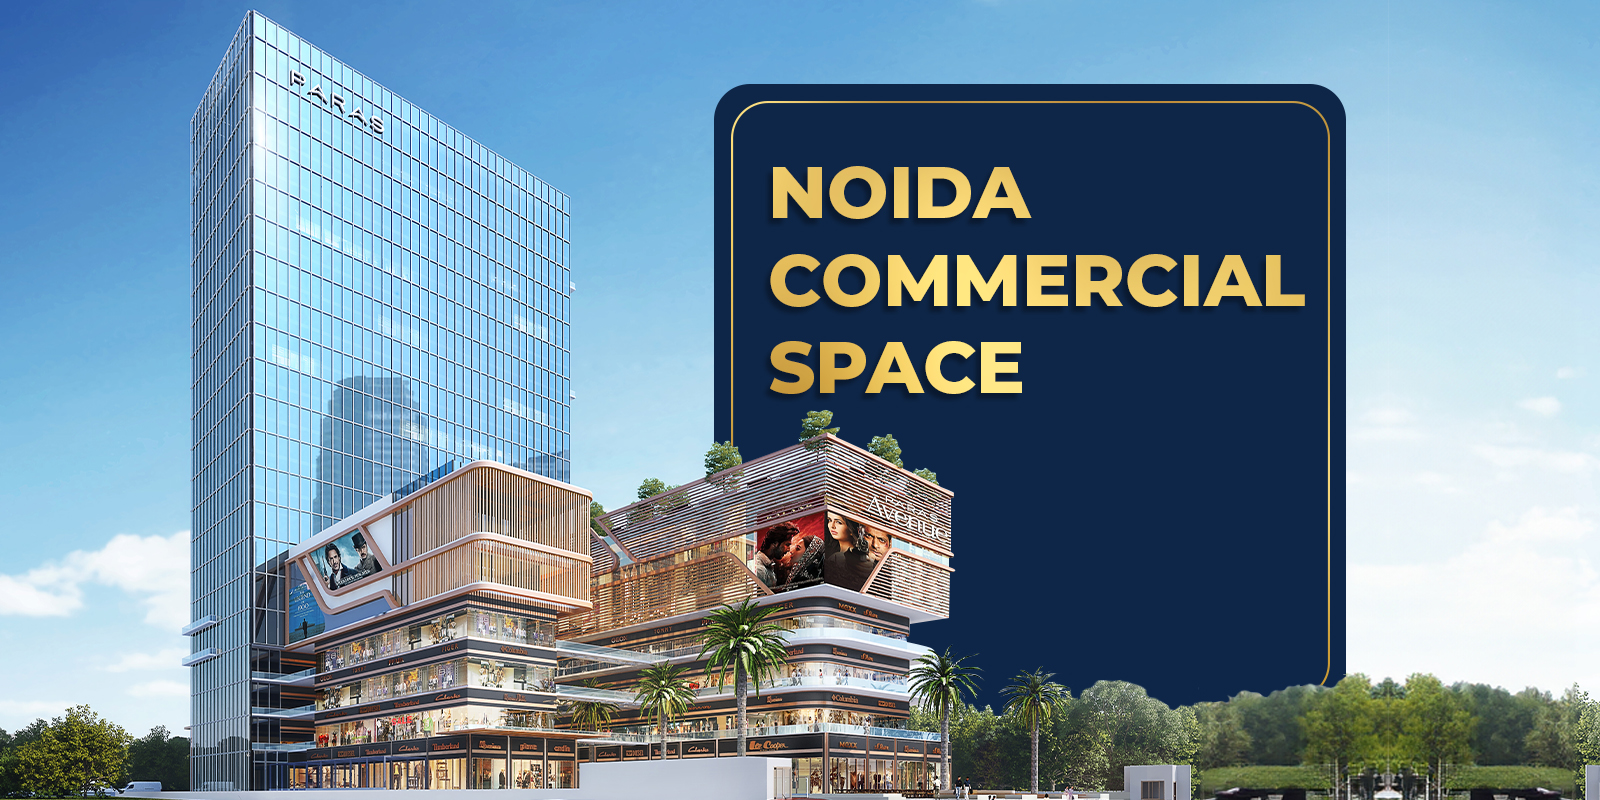 Paras Avenue: Your Gateway to Noida Commercial Space